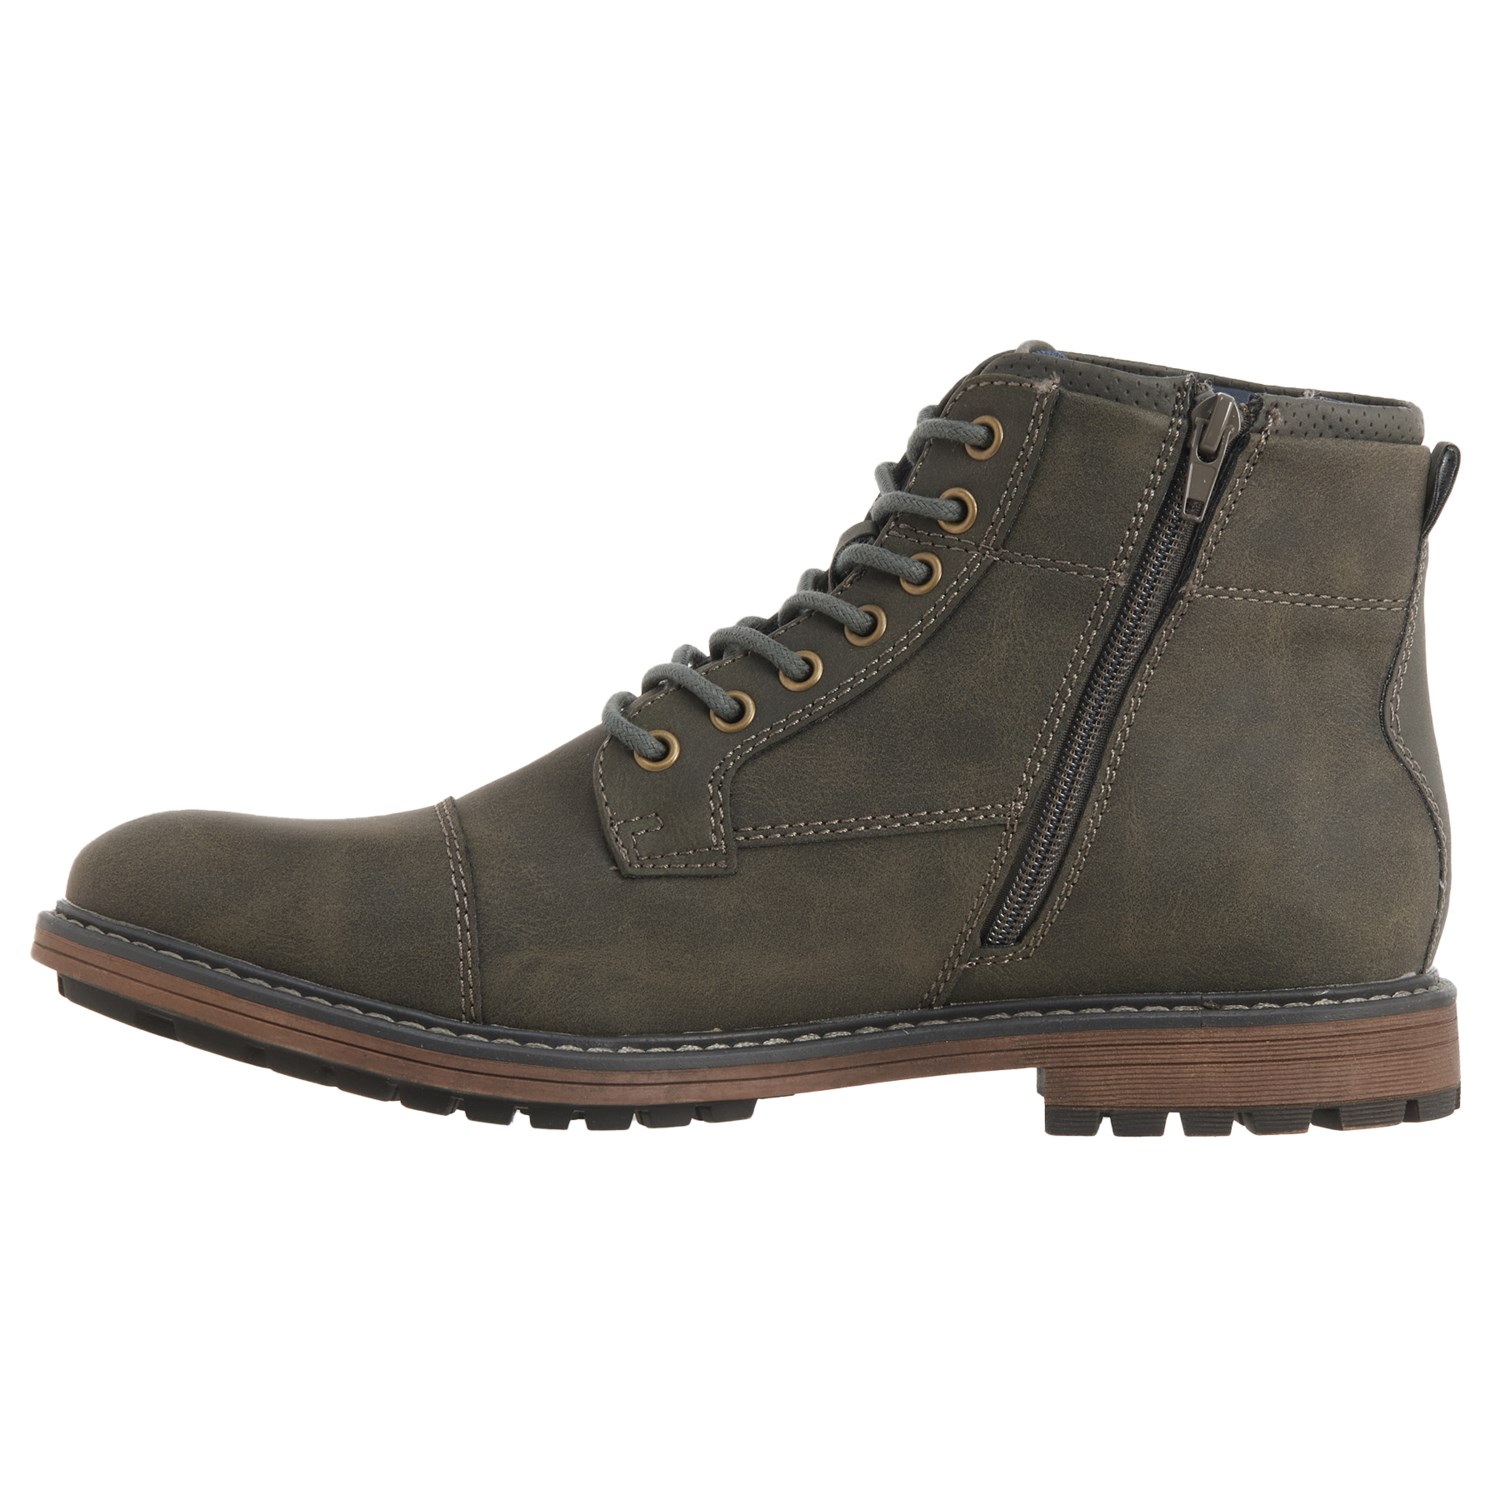 B-52 by Bullboxer Lift Cap Toe Boots (For Men) - Save 61%